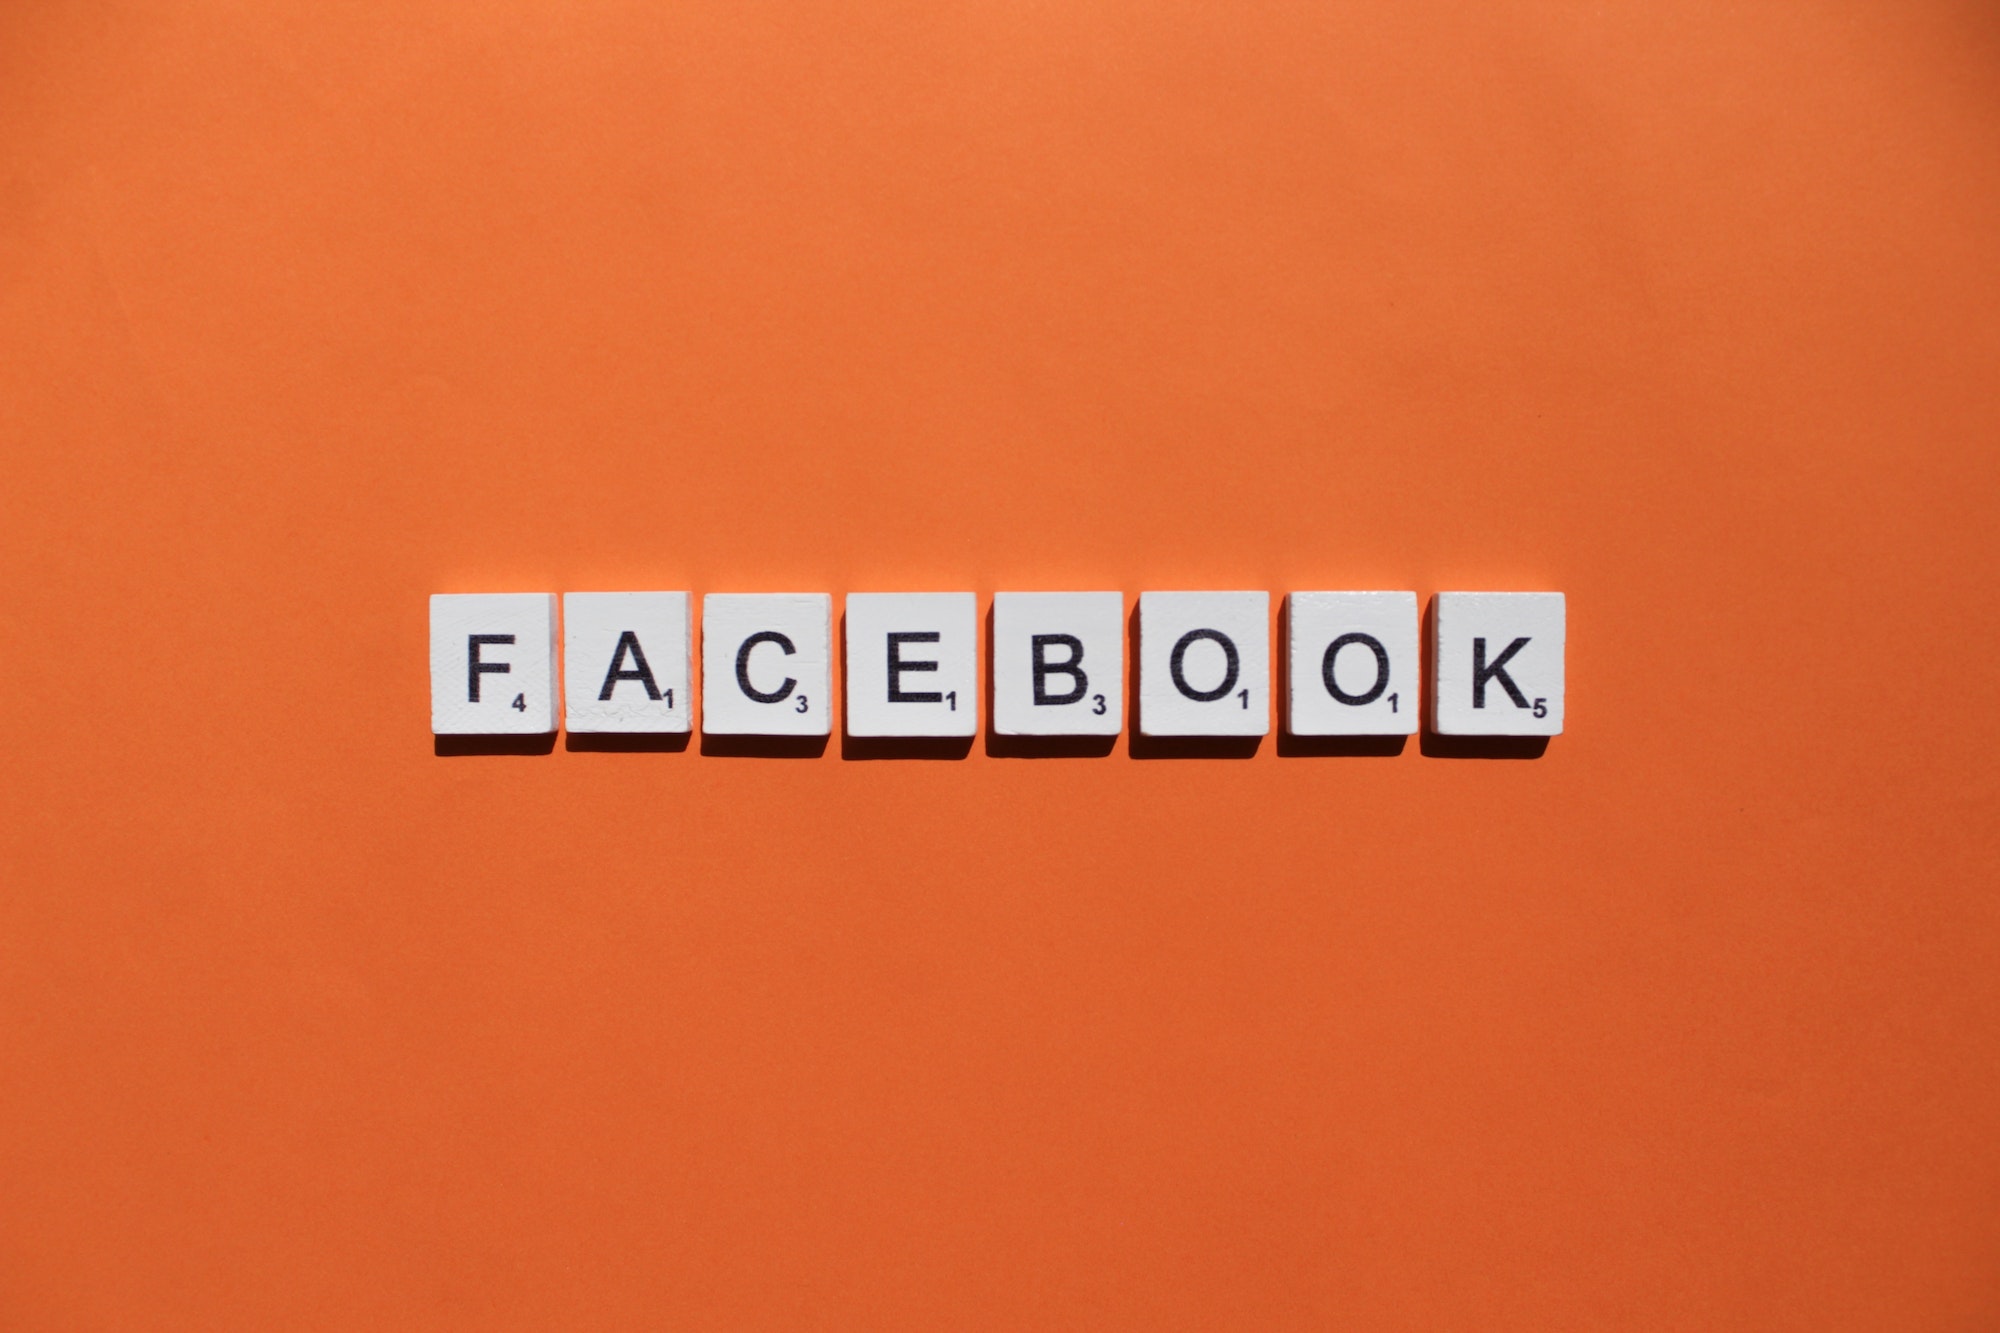 Facebook scrabble letters word on a orange background